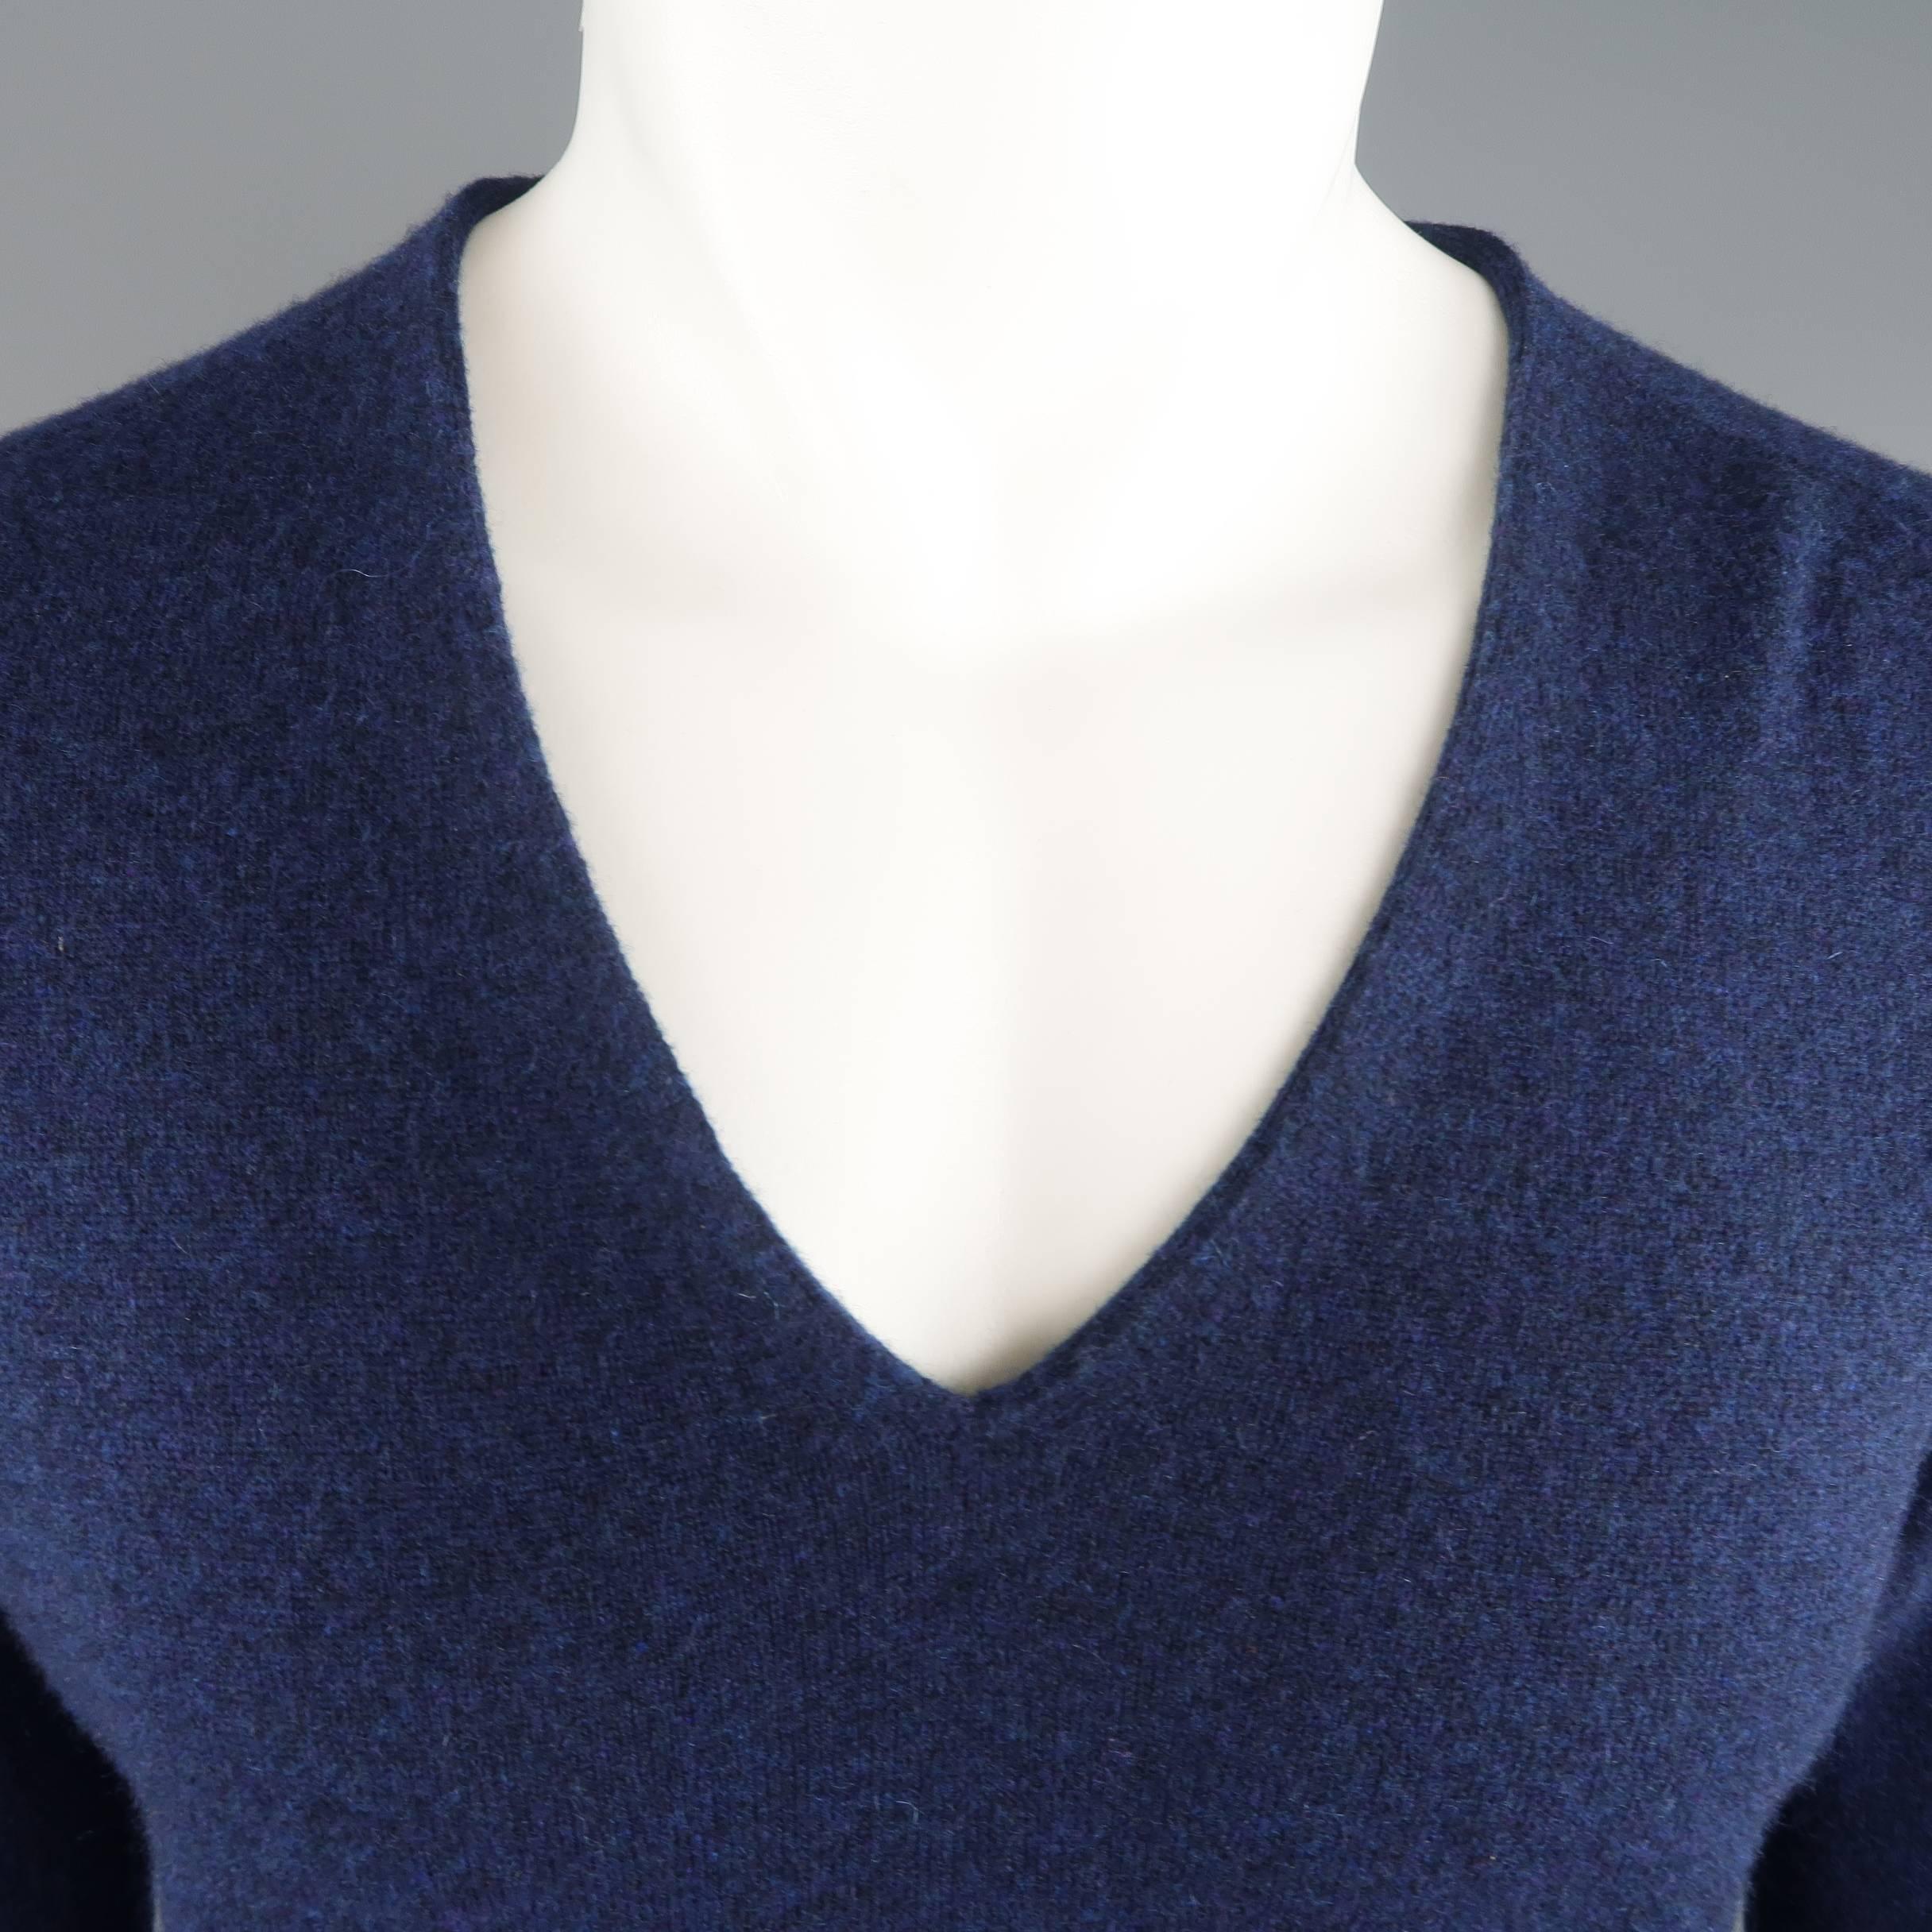 MAISON MARTIN MARGIELA pullover sweater comes in a heathered navy blue cashmere knit with a V neck and signature stitches at back. Made in Italy.
 
Good Pre-Owned Condition.
Marked: M
 
Measurements:
 
Shoulder: 16 in.
Chest: 44 in.
Sleeve: 27